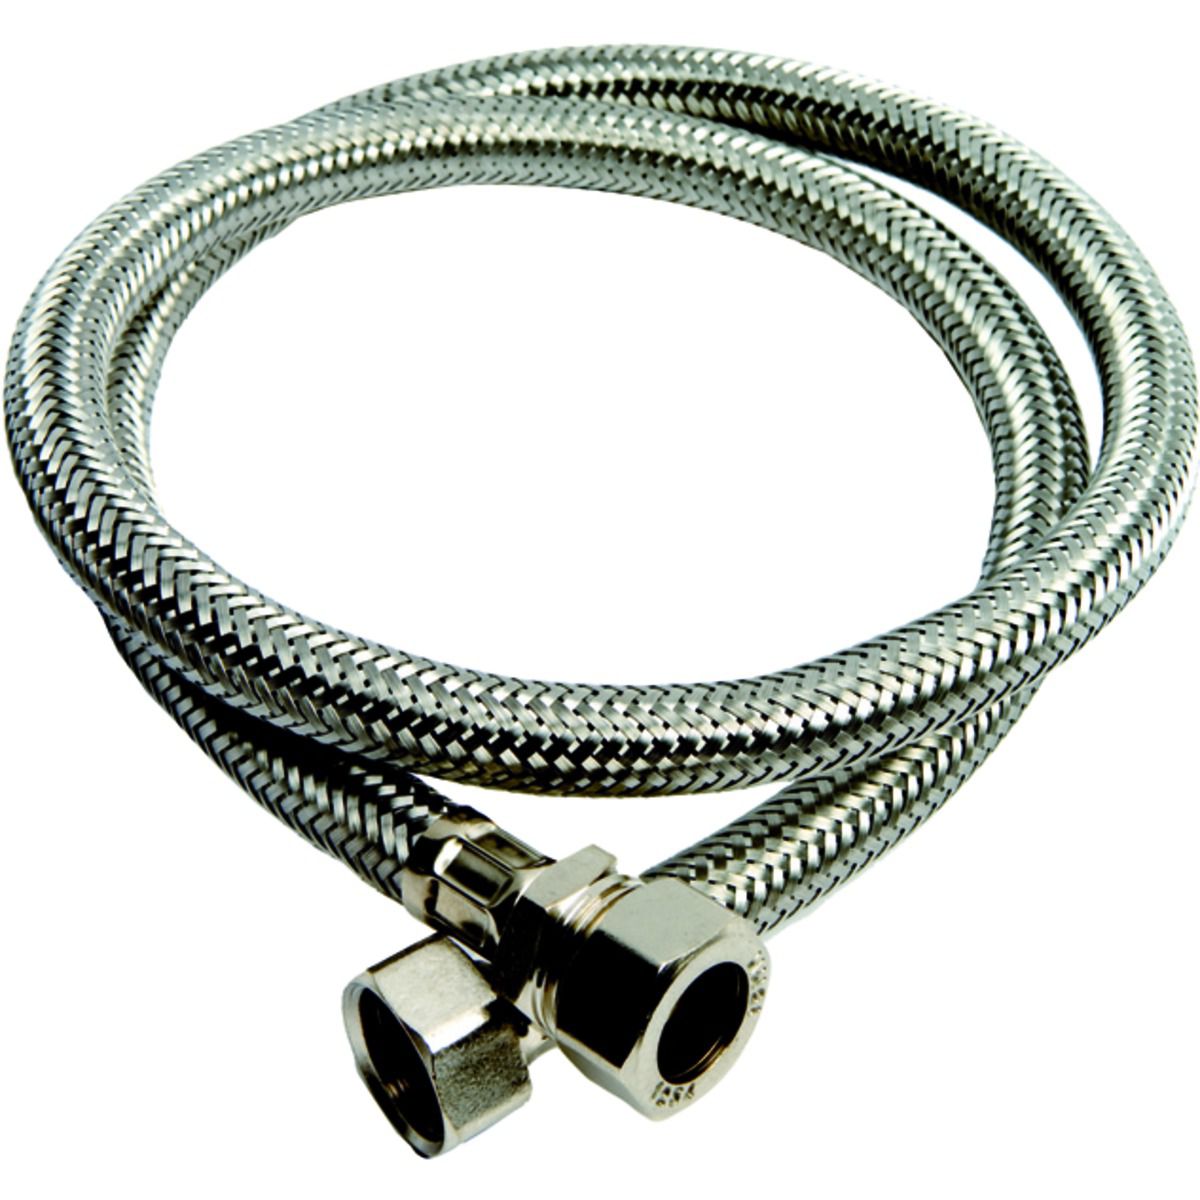 Image of Primaflow Flexible Tap Connector - 15 X 12 X 1000mm